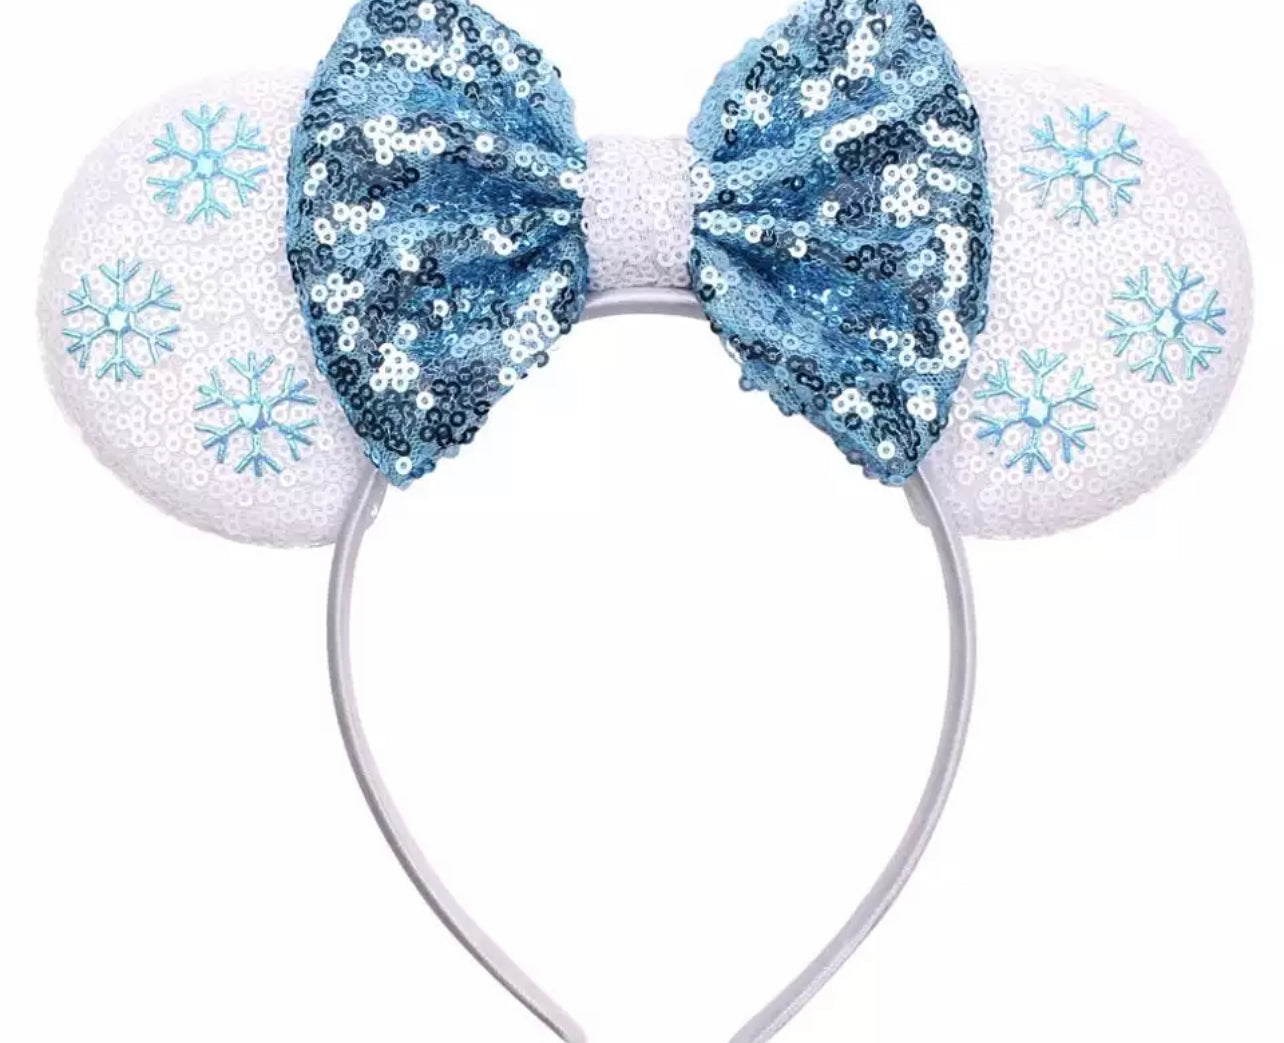 Mouse ears on plastic band